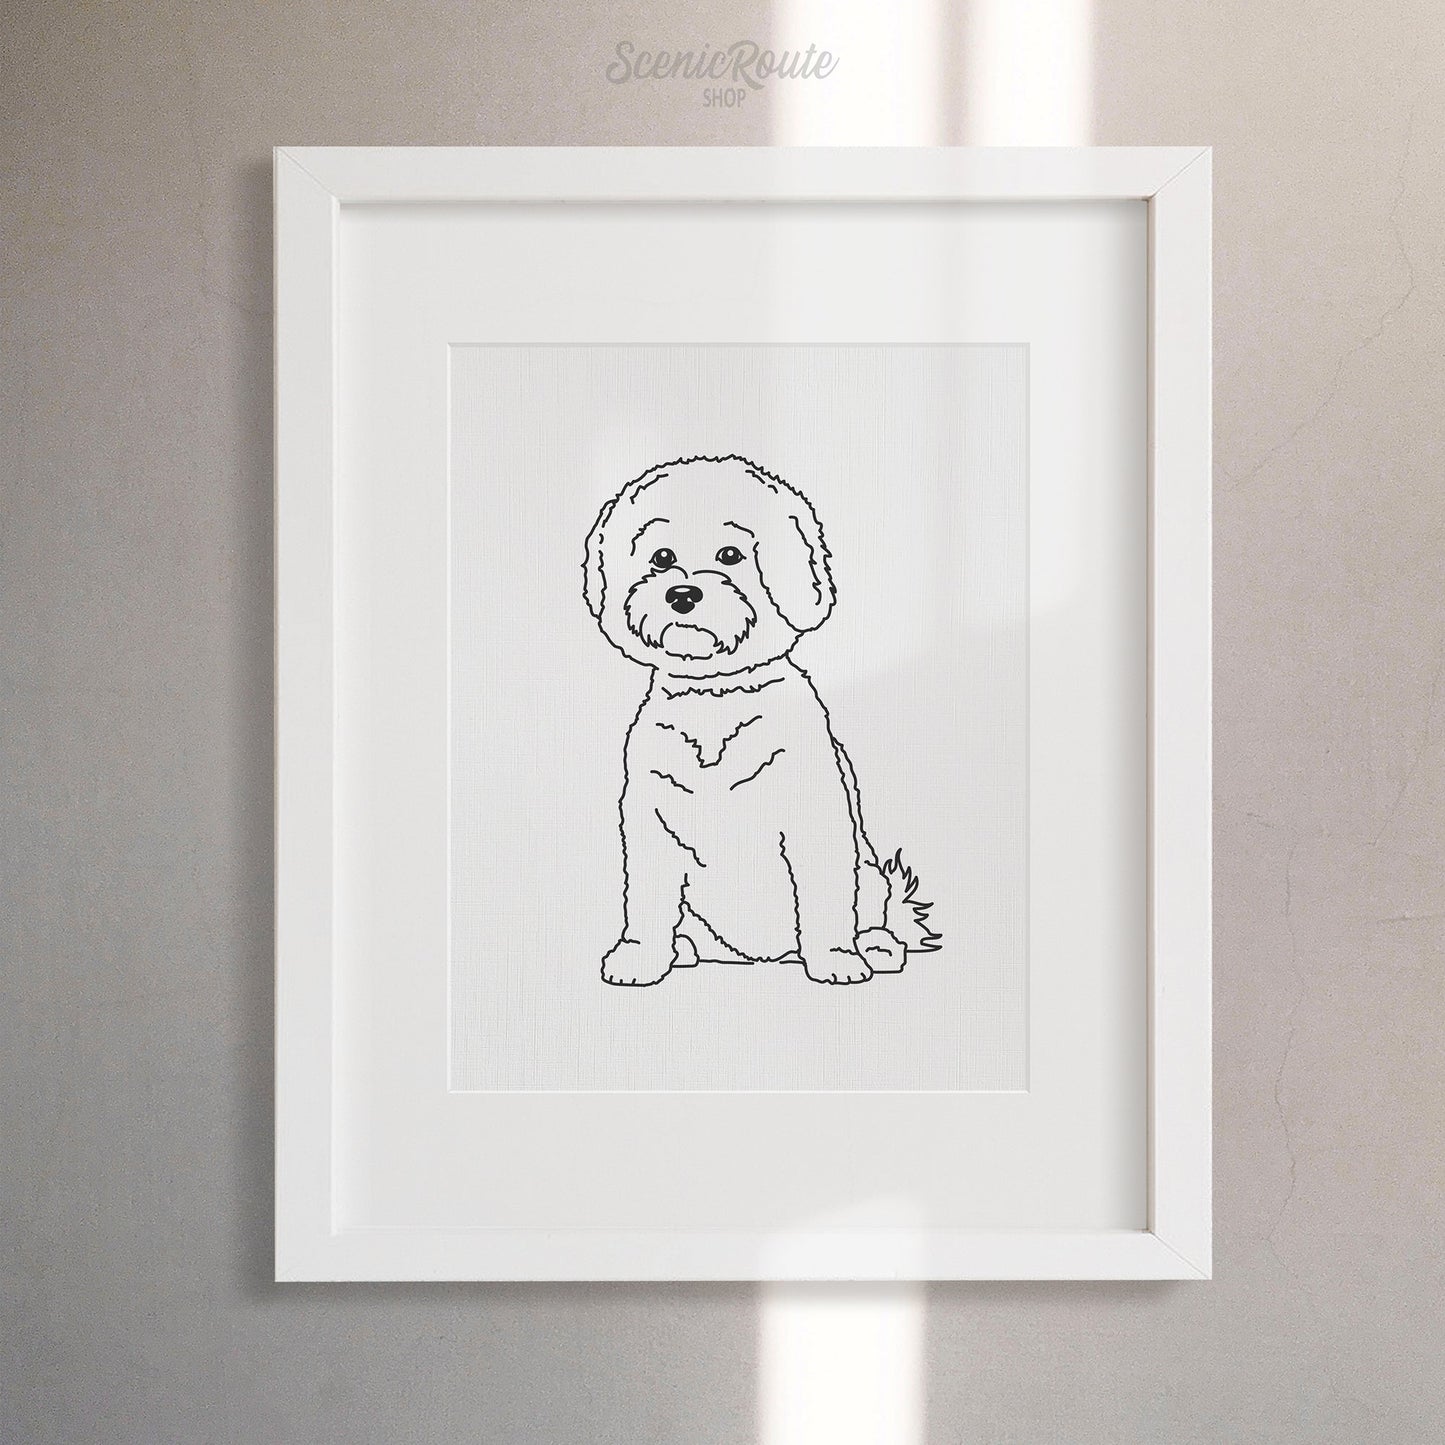 A framed line art drawing of a Bichon Frise dog on a white wall